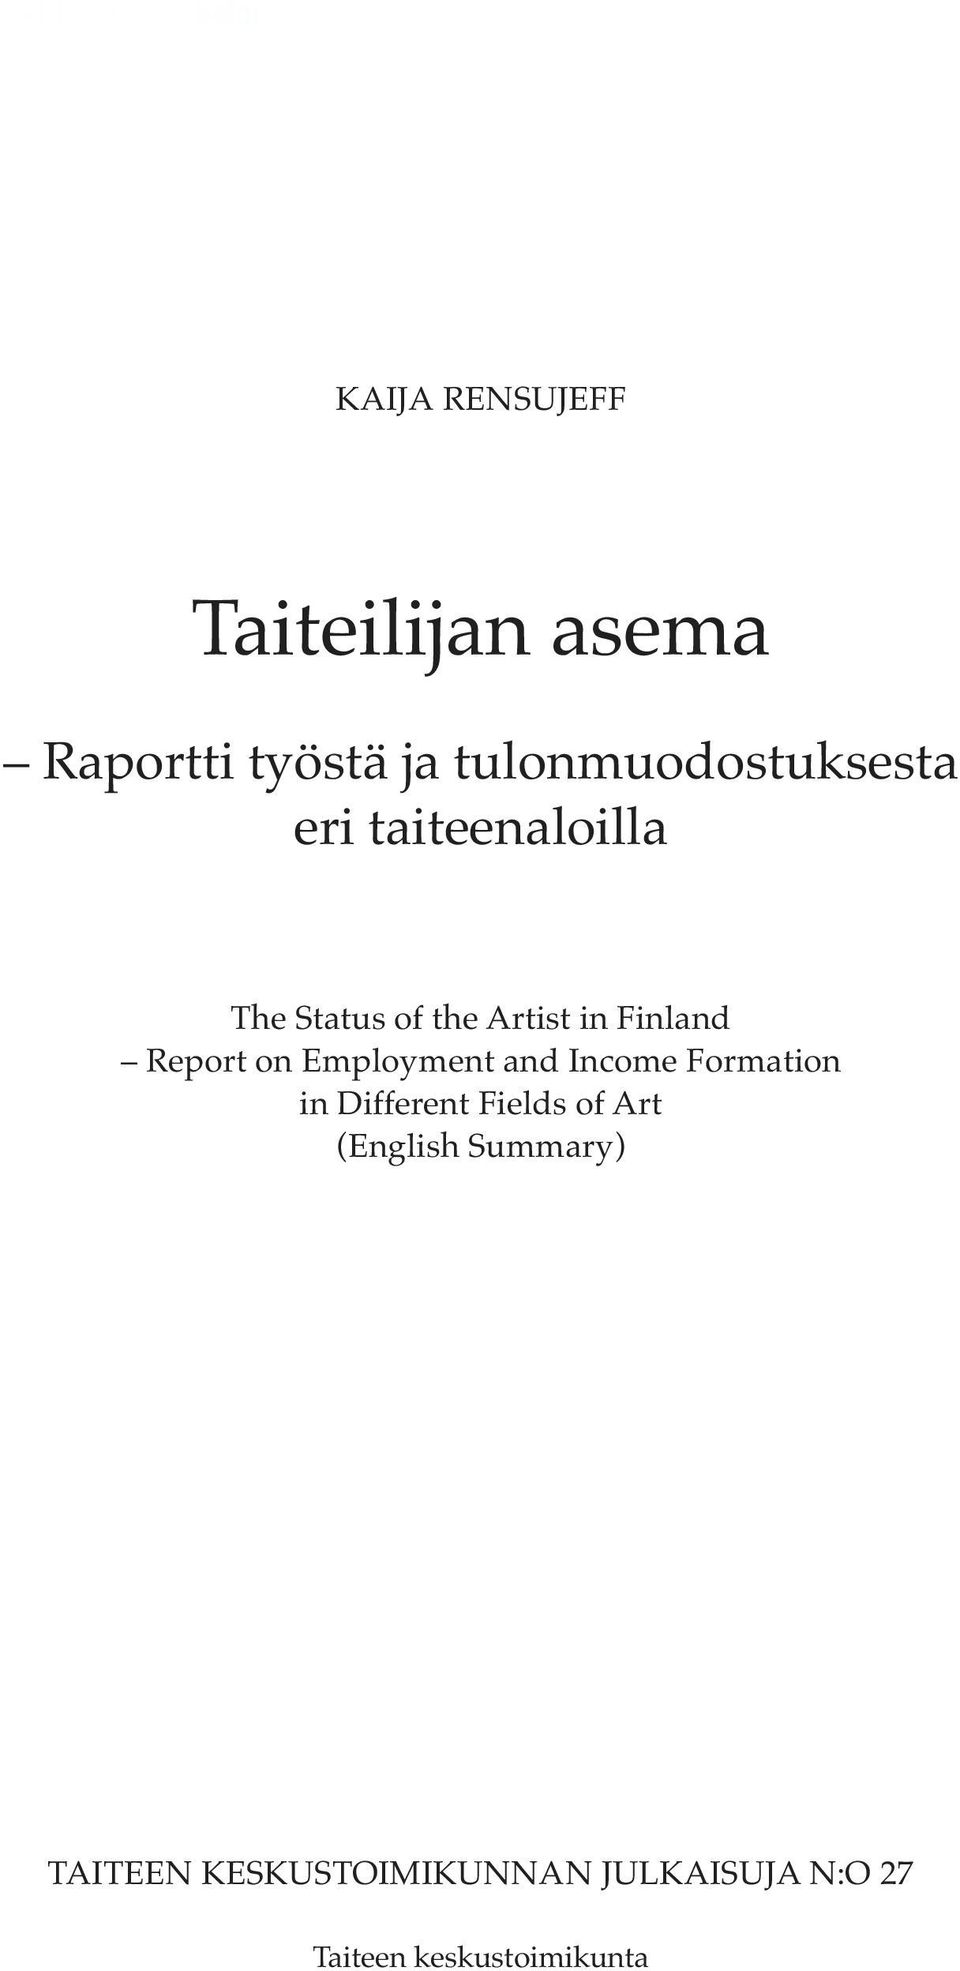 Report on Employment and Income Formation in Different Fields of Art